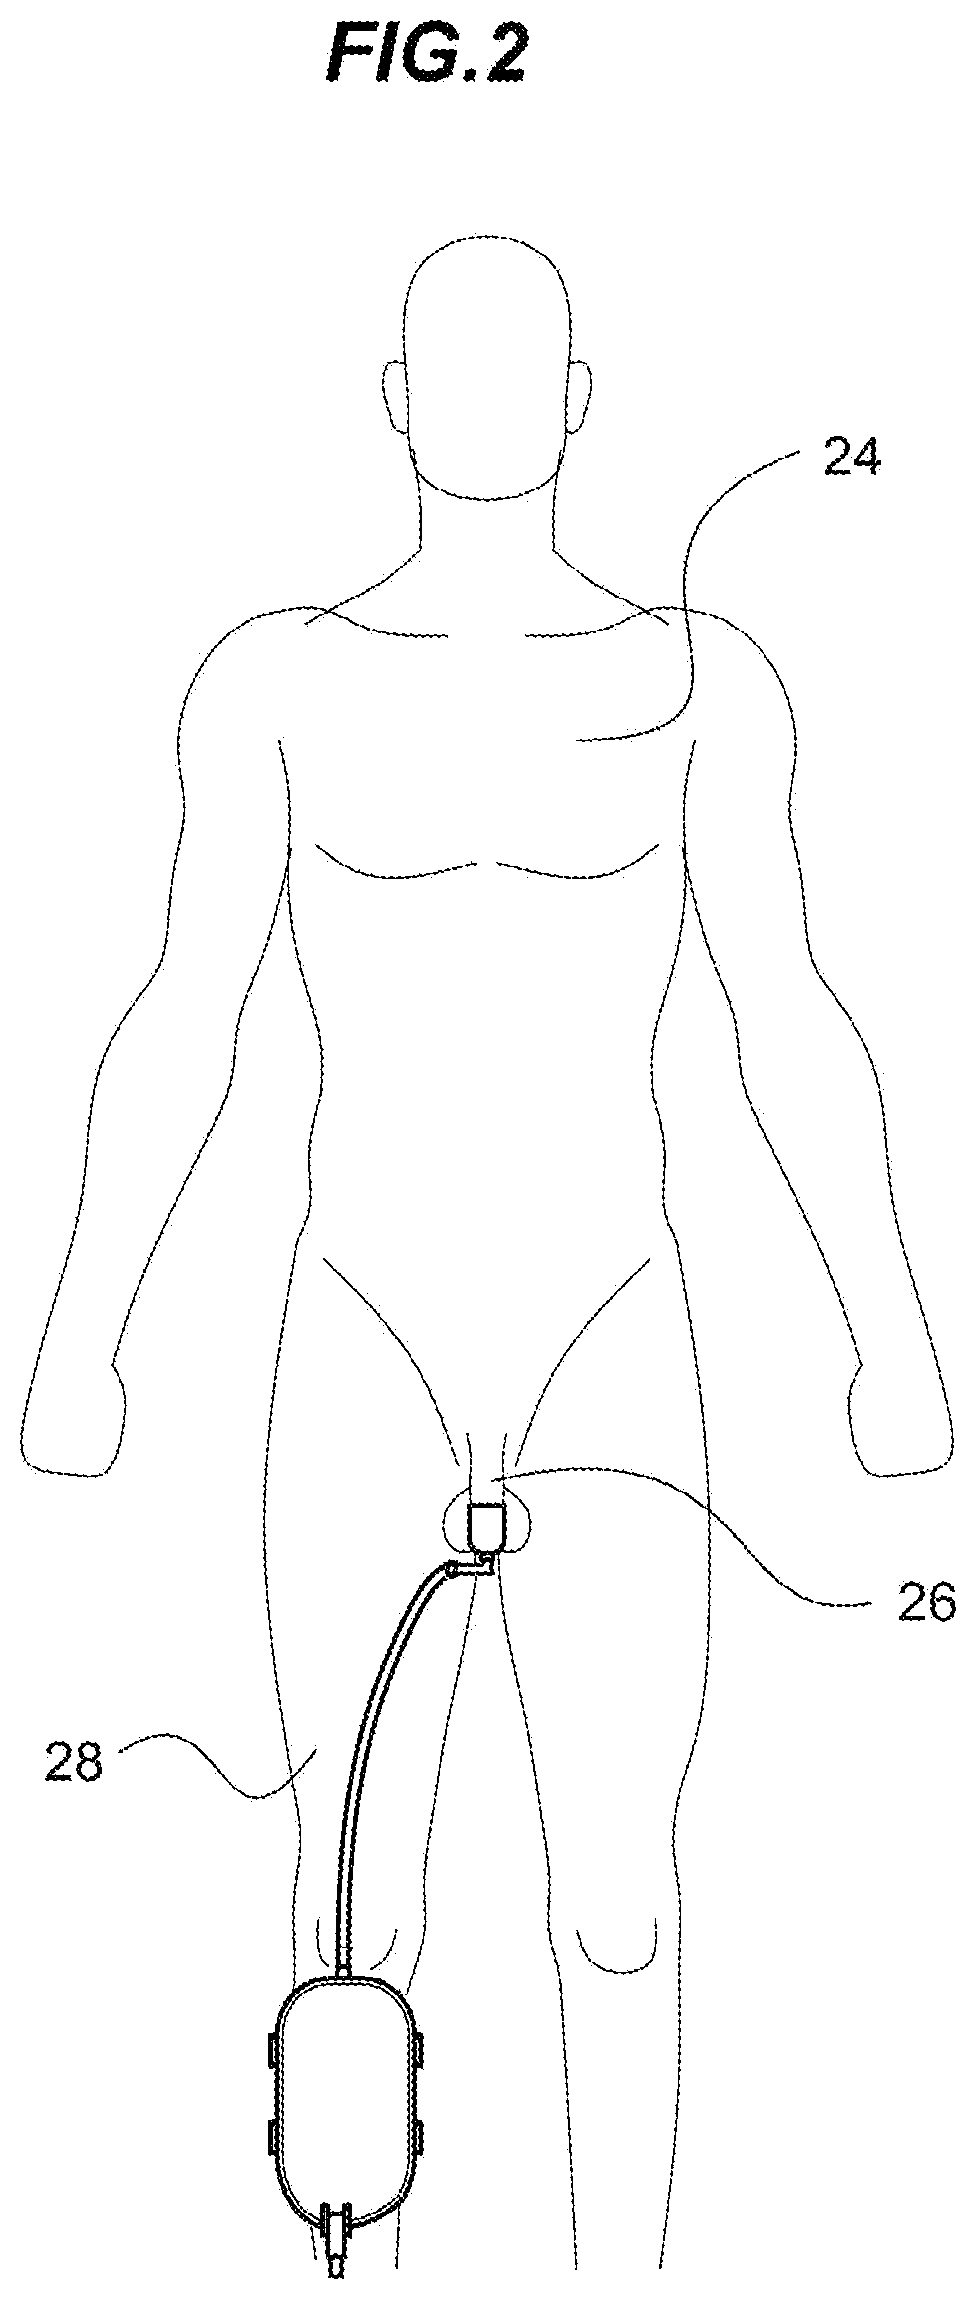 Reusable penile attachment for urinary incontinence which uses pressure differential as means of attachment